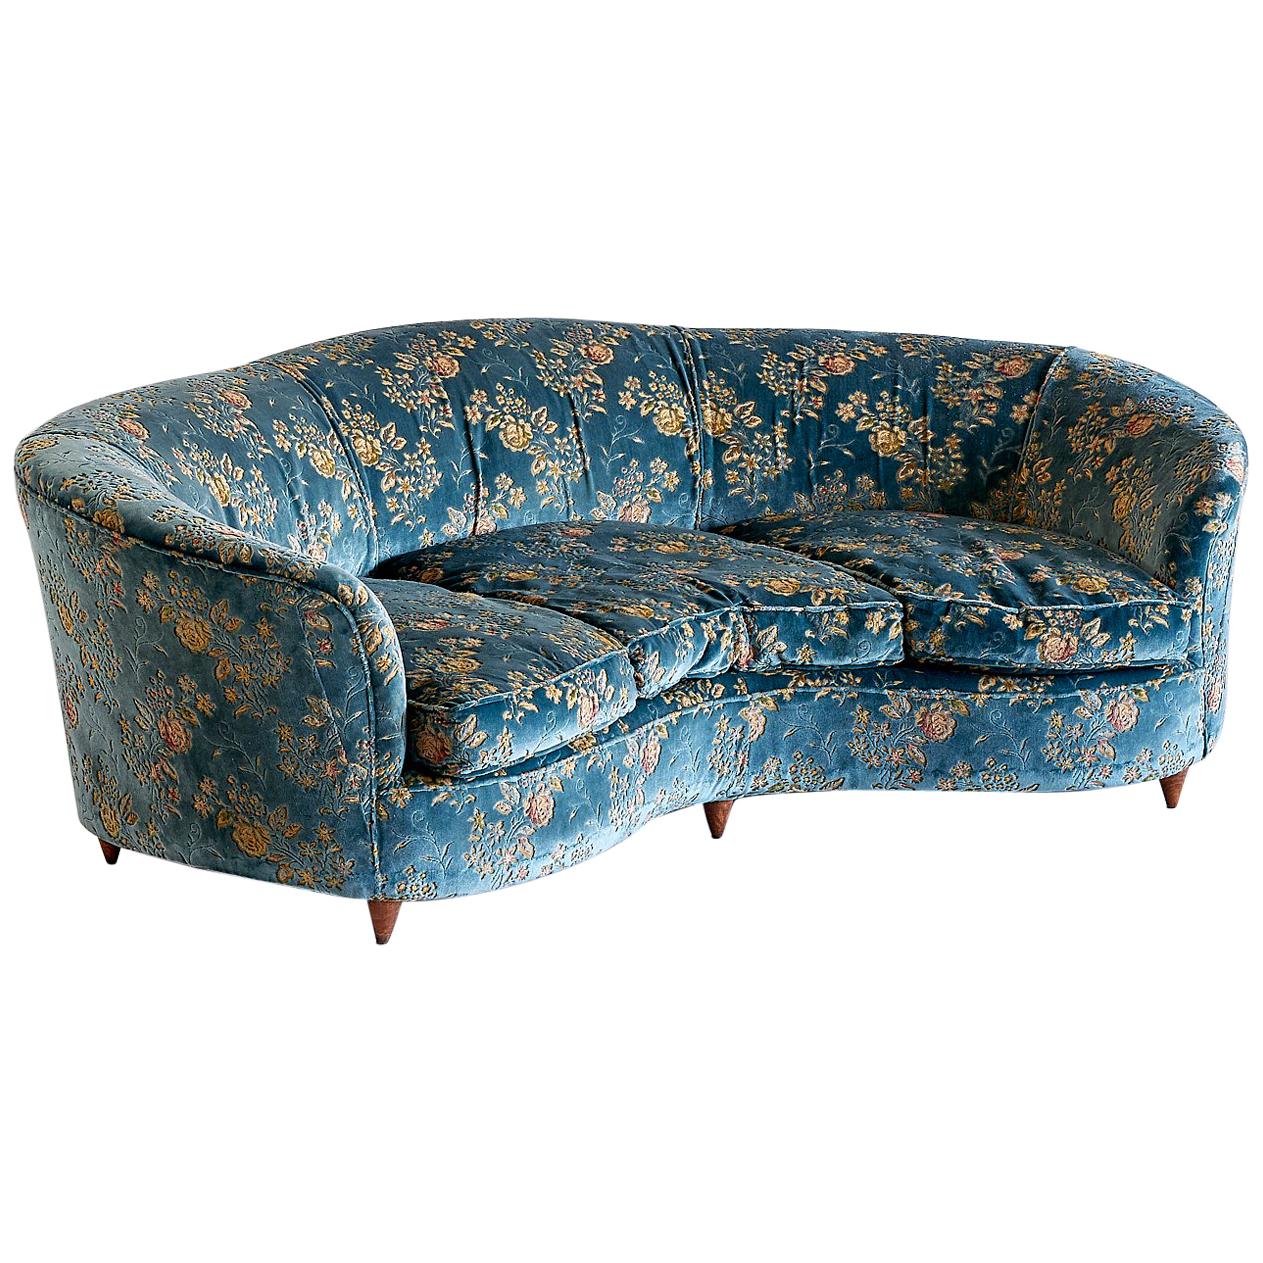 Large Gio Ponti Attributed Curved Sofa in Original Blue Floral Upholstery, 1930s